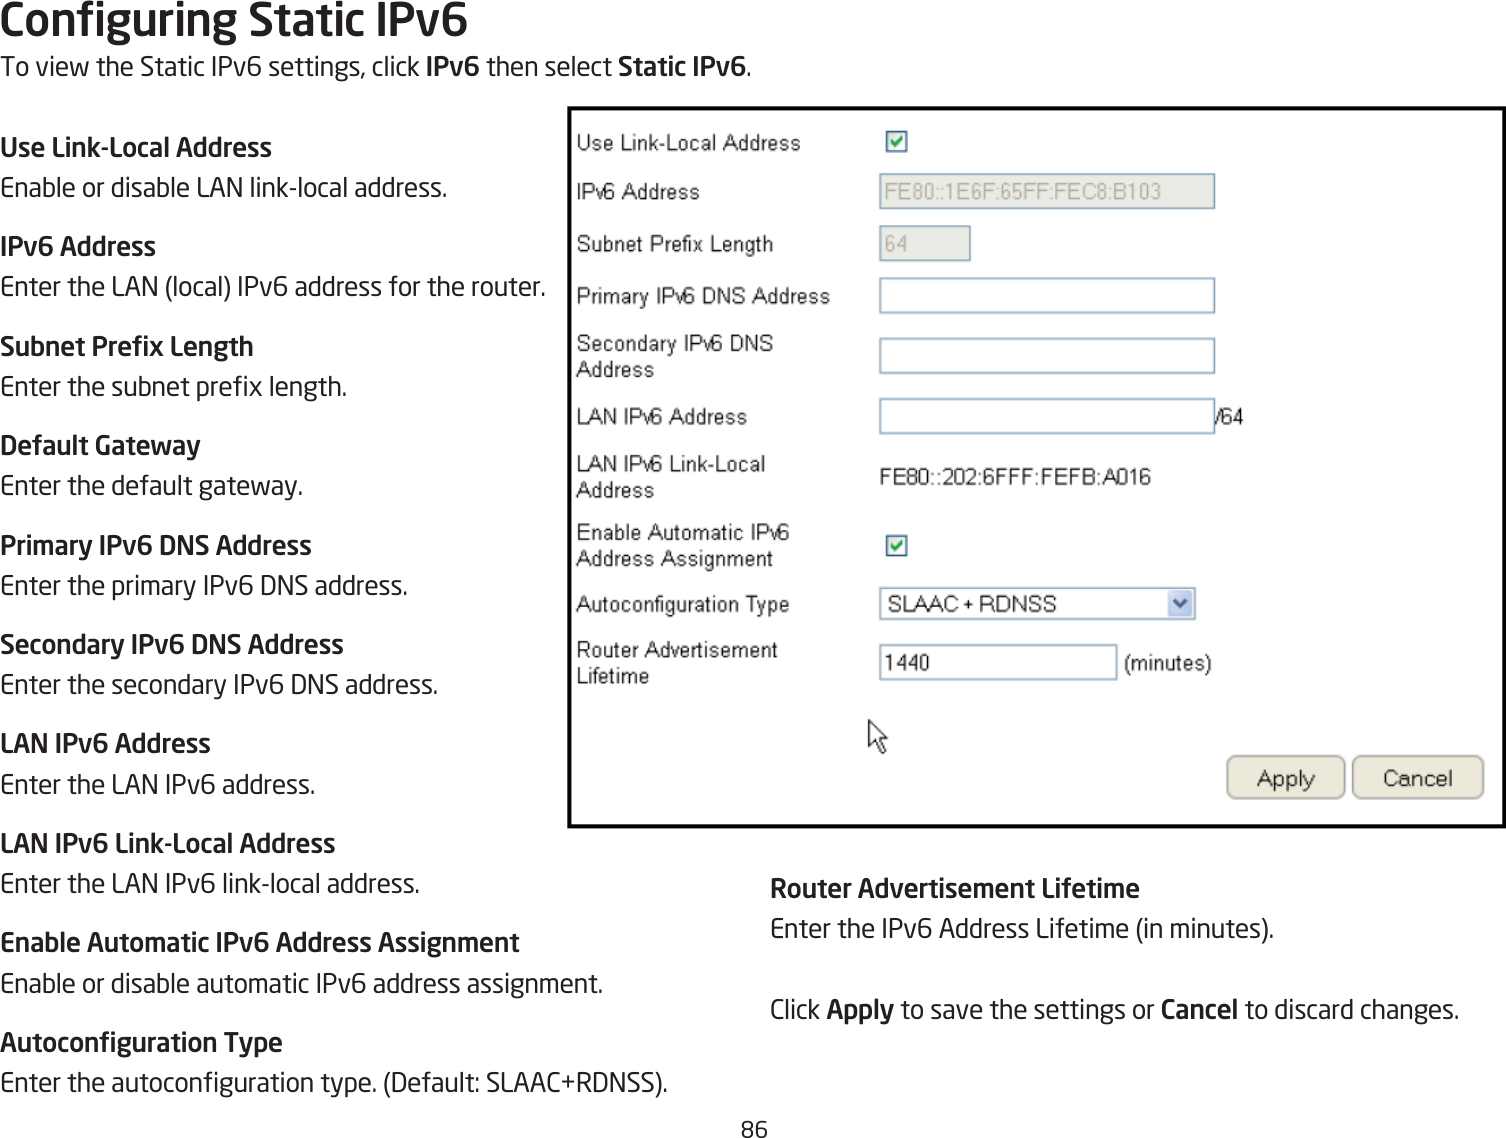 &apos;6Conguring Static IPv6To vief the Static IPv6 settings, click IPv6 then select Static IPv6.Use Link-Local AddressEnaQle or disaQle LA= linklocal address.IPv6 AddressEnter the LA= local IPv6 address for the router.Subnet Prex LengthEnter the suQnet preg length.DeUault GatewayEnter the default gatefay.Pri\ary IPv6 DNS AddressEnter the primary IPv6 3=S address.Secondary IPv6 DNS AddressEnter the secondary IPv6 3=S address.LAN IPv6 AddressEnter the LA= IPv6 address.LAN IPv6 Link-Local AddressEnter the LA= IPv6 linklocal address.Enable Auto\atic IPv6 Address Assign\entEnaQle or disaQle automatic IPv6 address assignment.Autoconguration TypeEnter the autoconguration type. 3efault: SLAA2R3=SS.Router Advertise\ent LiUeti\eEnter the IPv6 Address Lifetime in minutes.2lick Apply to save the settings or Cancel to discard changes.